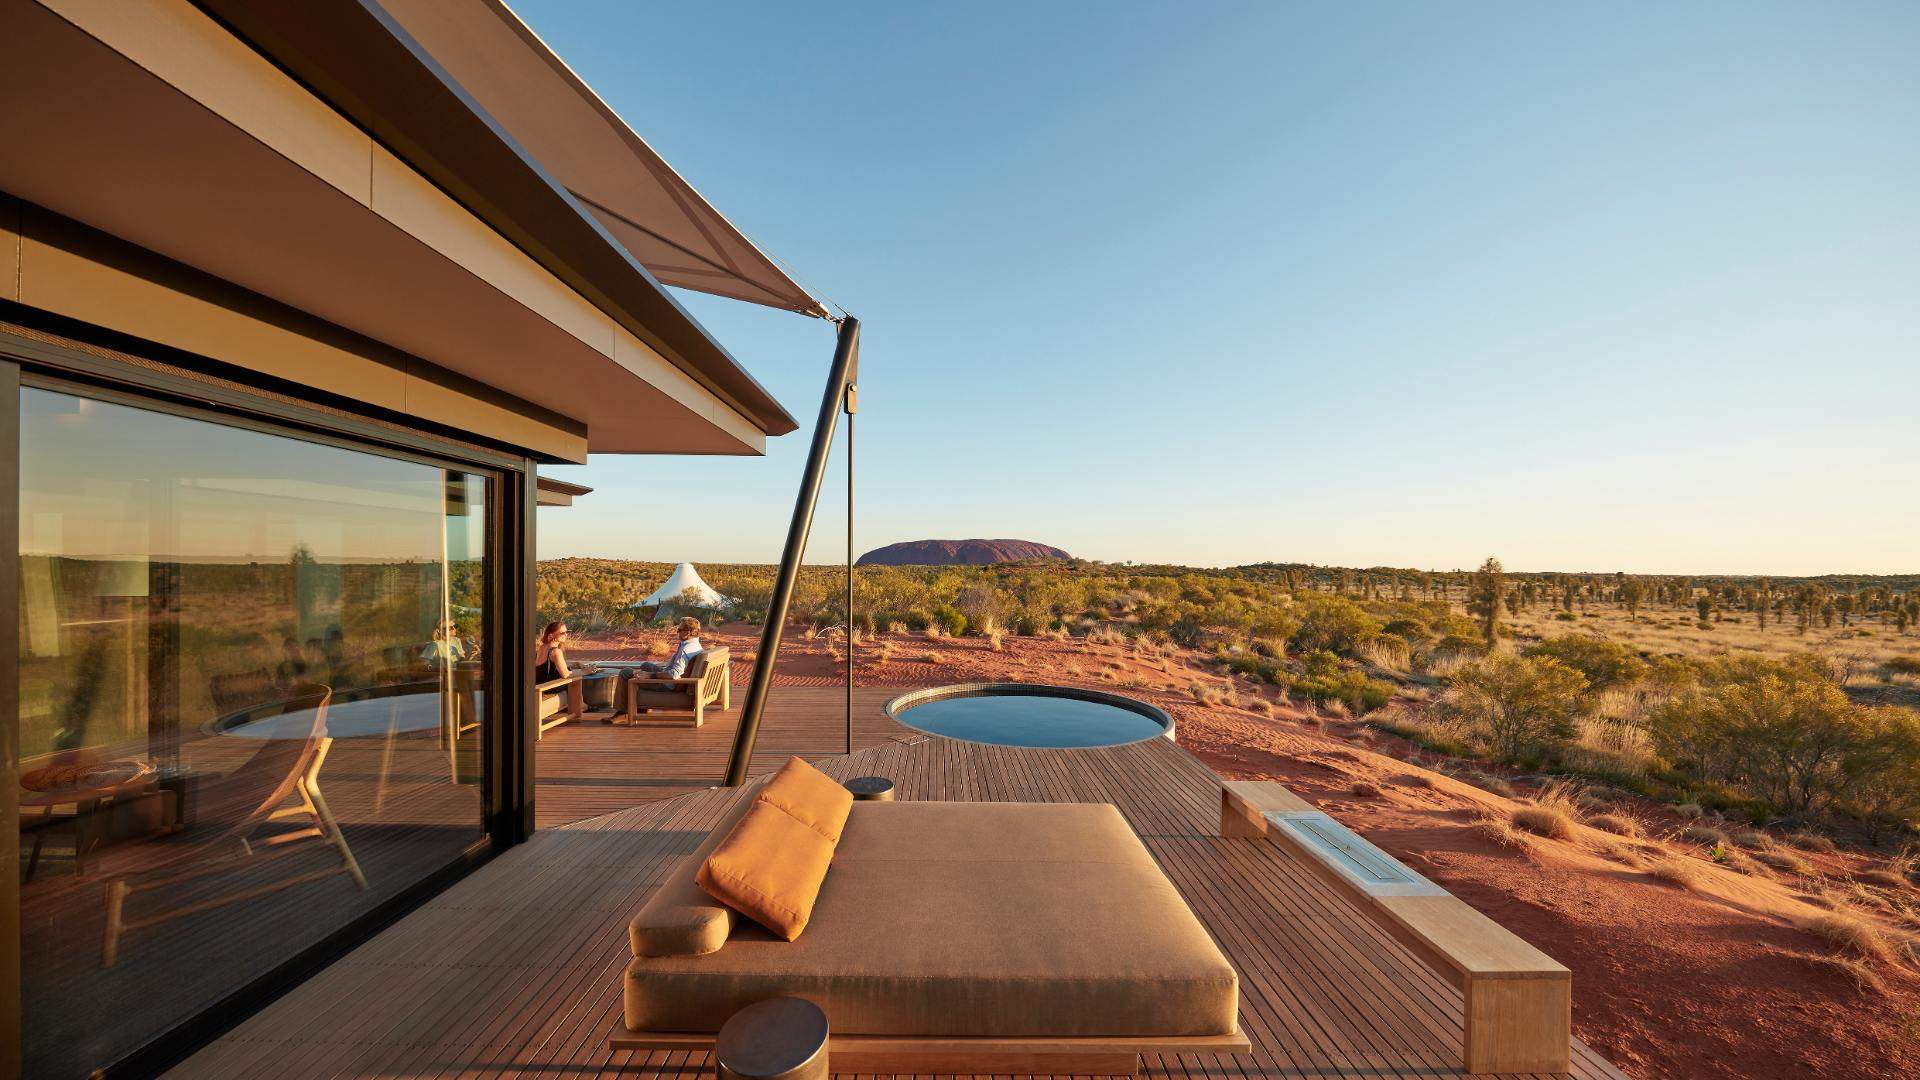 Seven Outrageously Luxe Australian Getaways for When You Really Want to Treat Yourself